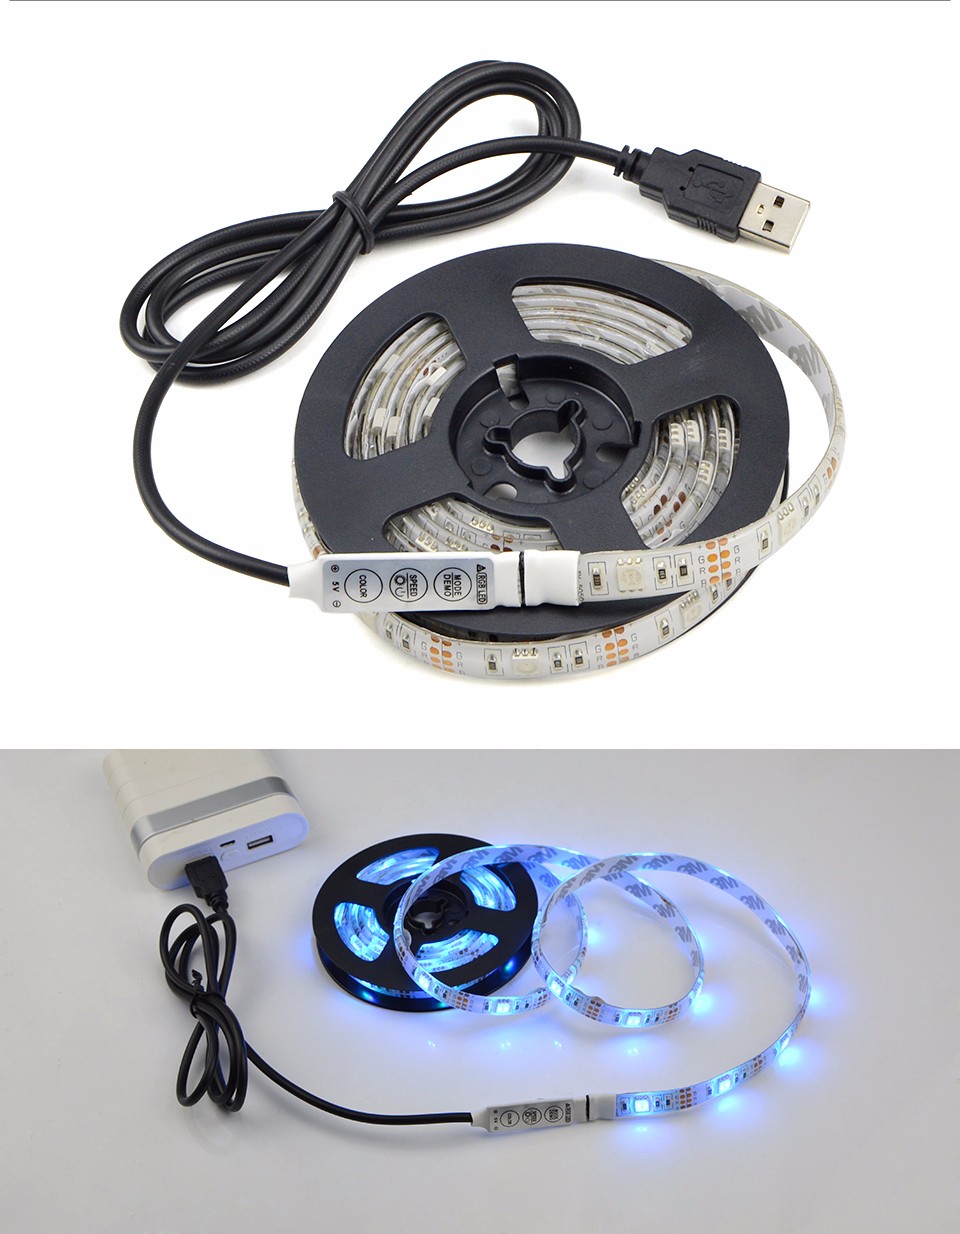 LED light 5050 SMD RGB USB cable charger 5V LED Strip light 1m 2m IP20 IP65 waterproof remote control for home Lighting lamp